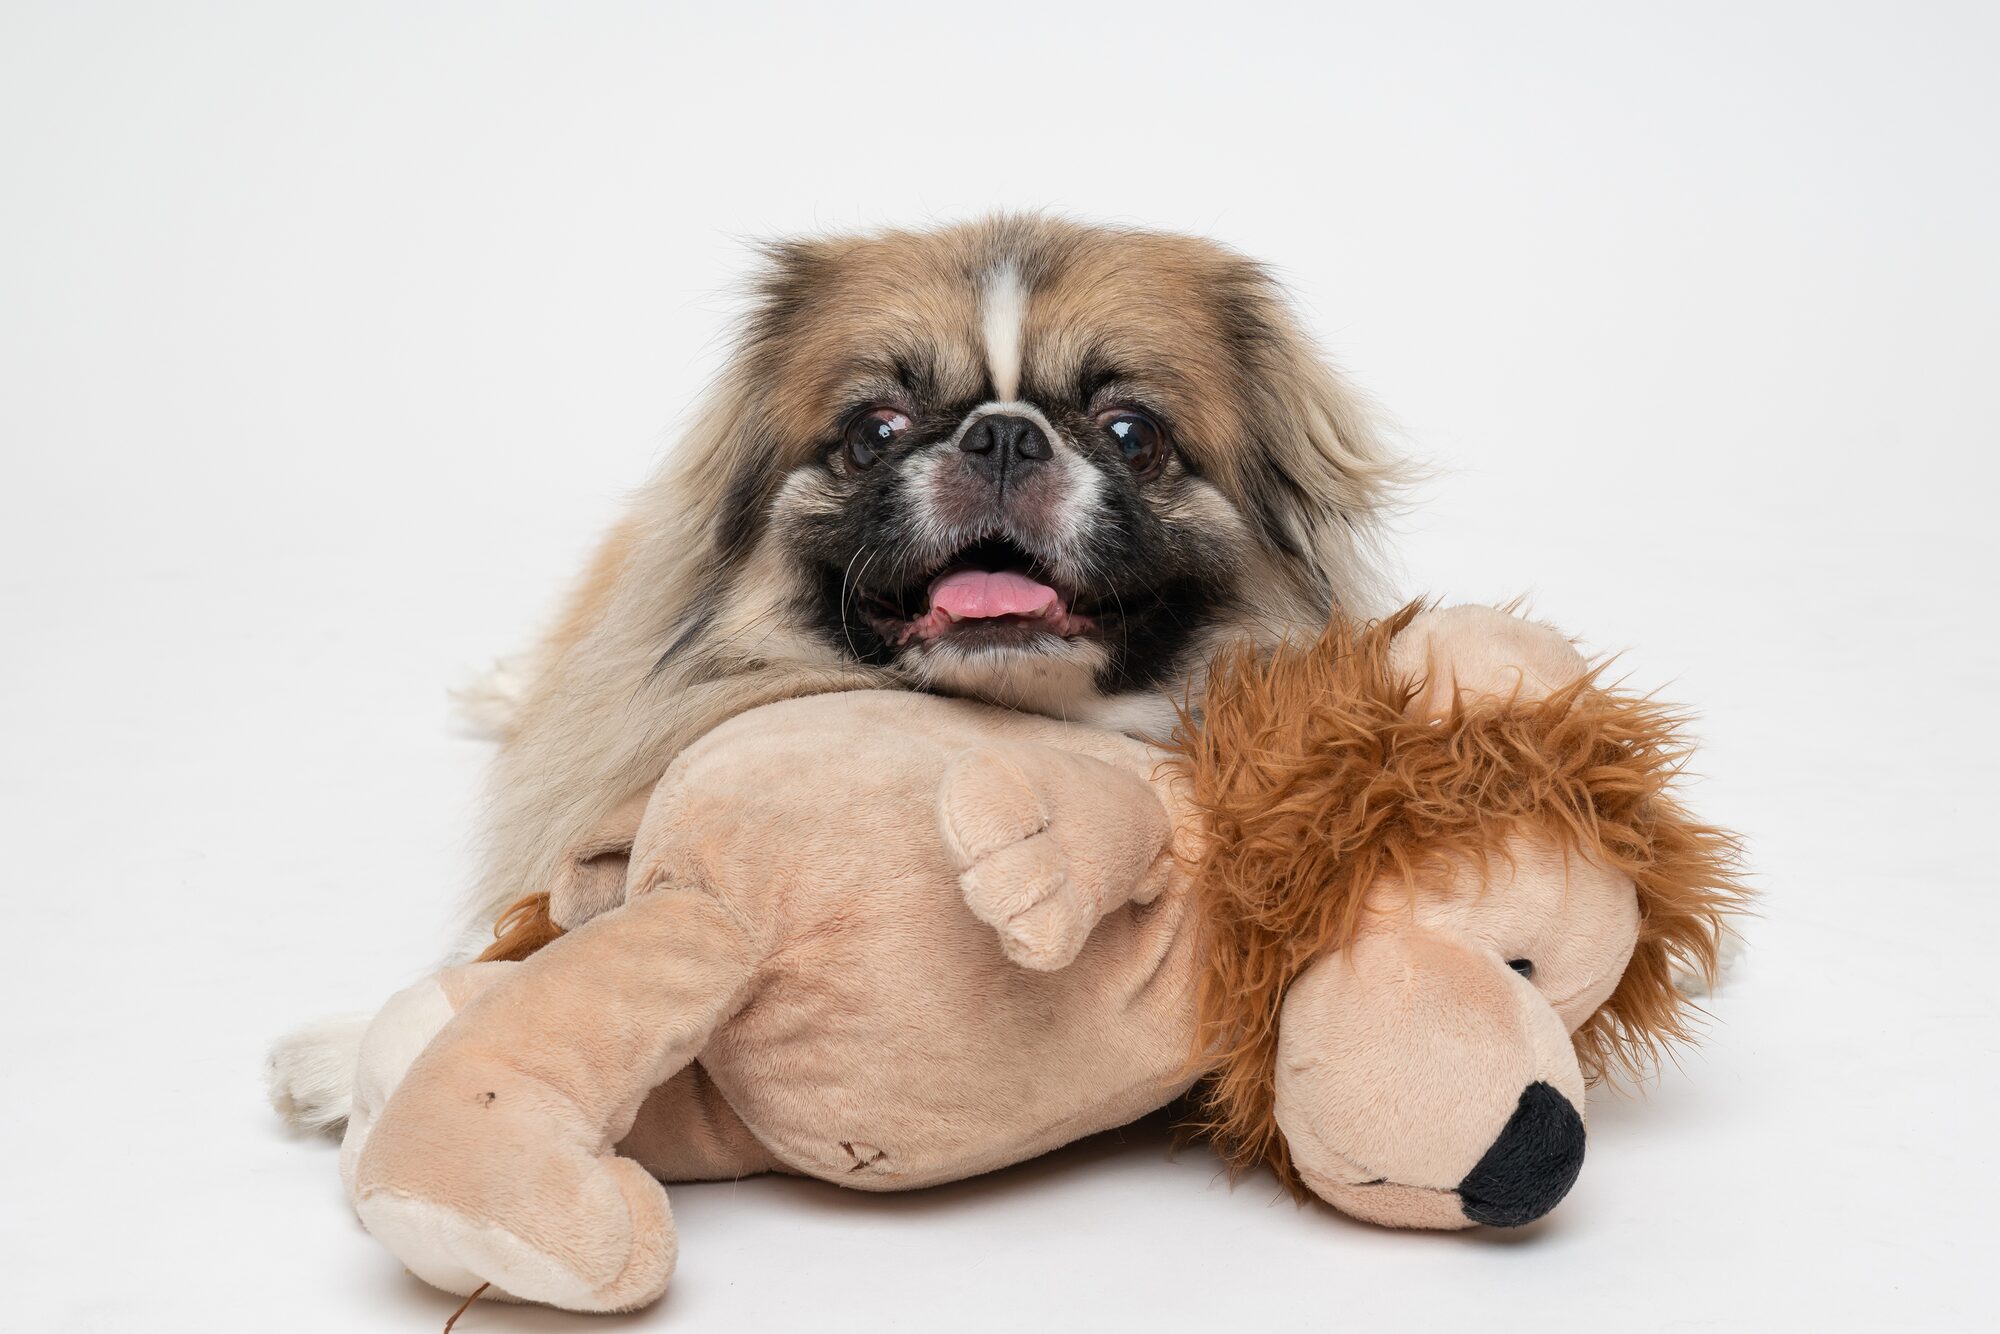 Use toys and treats to lure your furry friend to 'pose'. With a stuffed toy, the dog is seen truly happy in this shot taken by Sony's Alpha 7R III